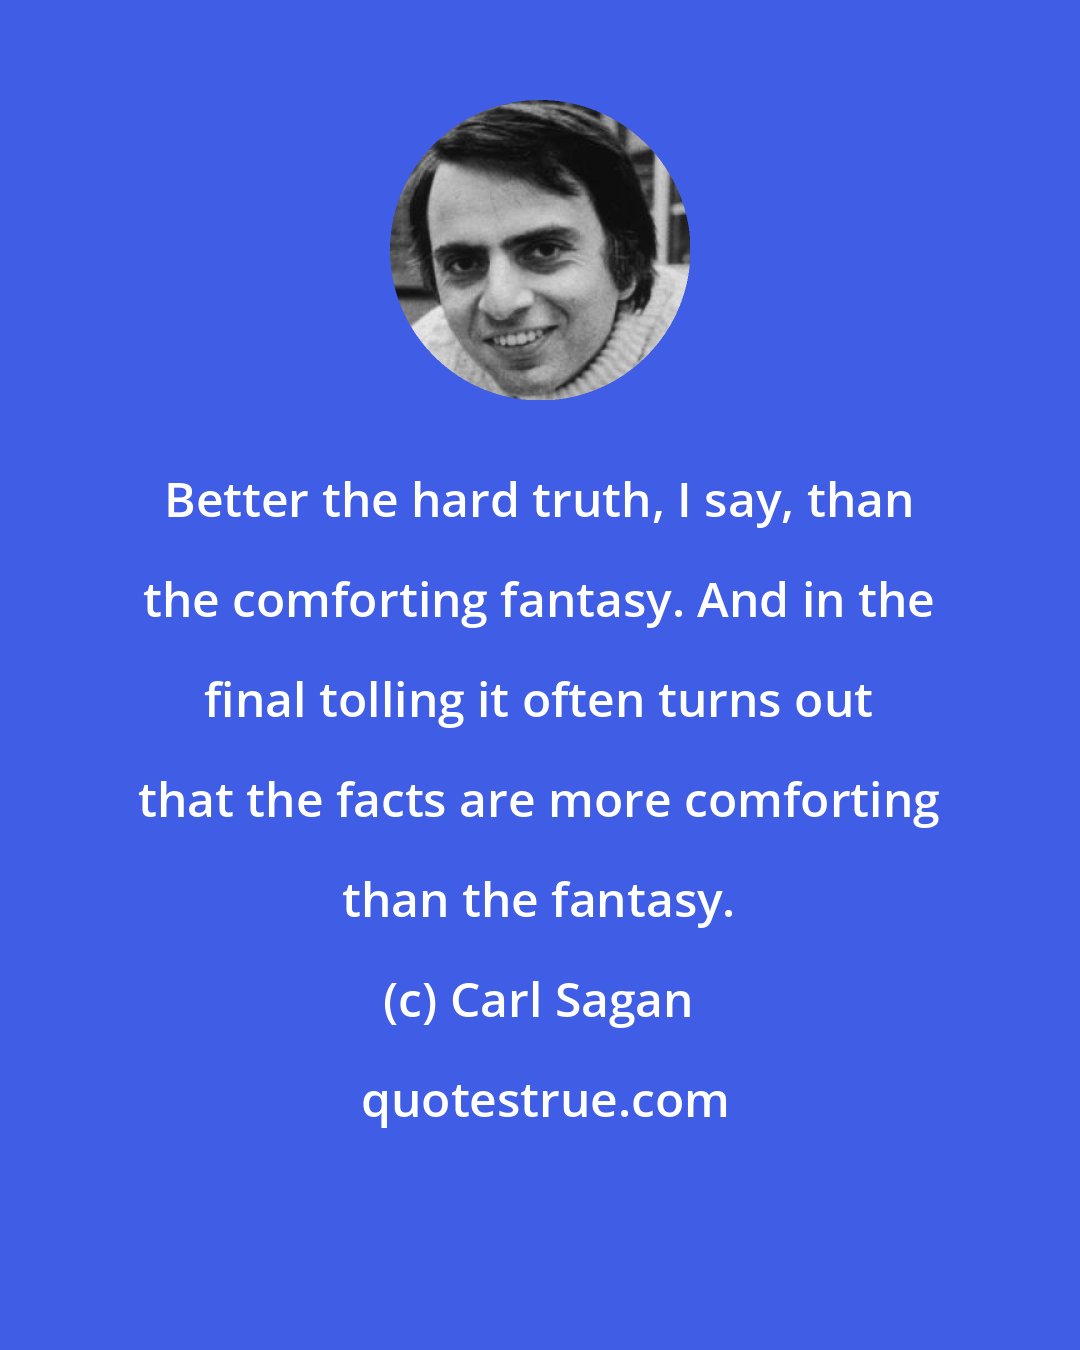 Carl Sagan: Better the hard truth, I say, than the comforting fantasy. And in the final tolling it often turns out that the facts are more comforting than the fantasy.